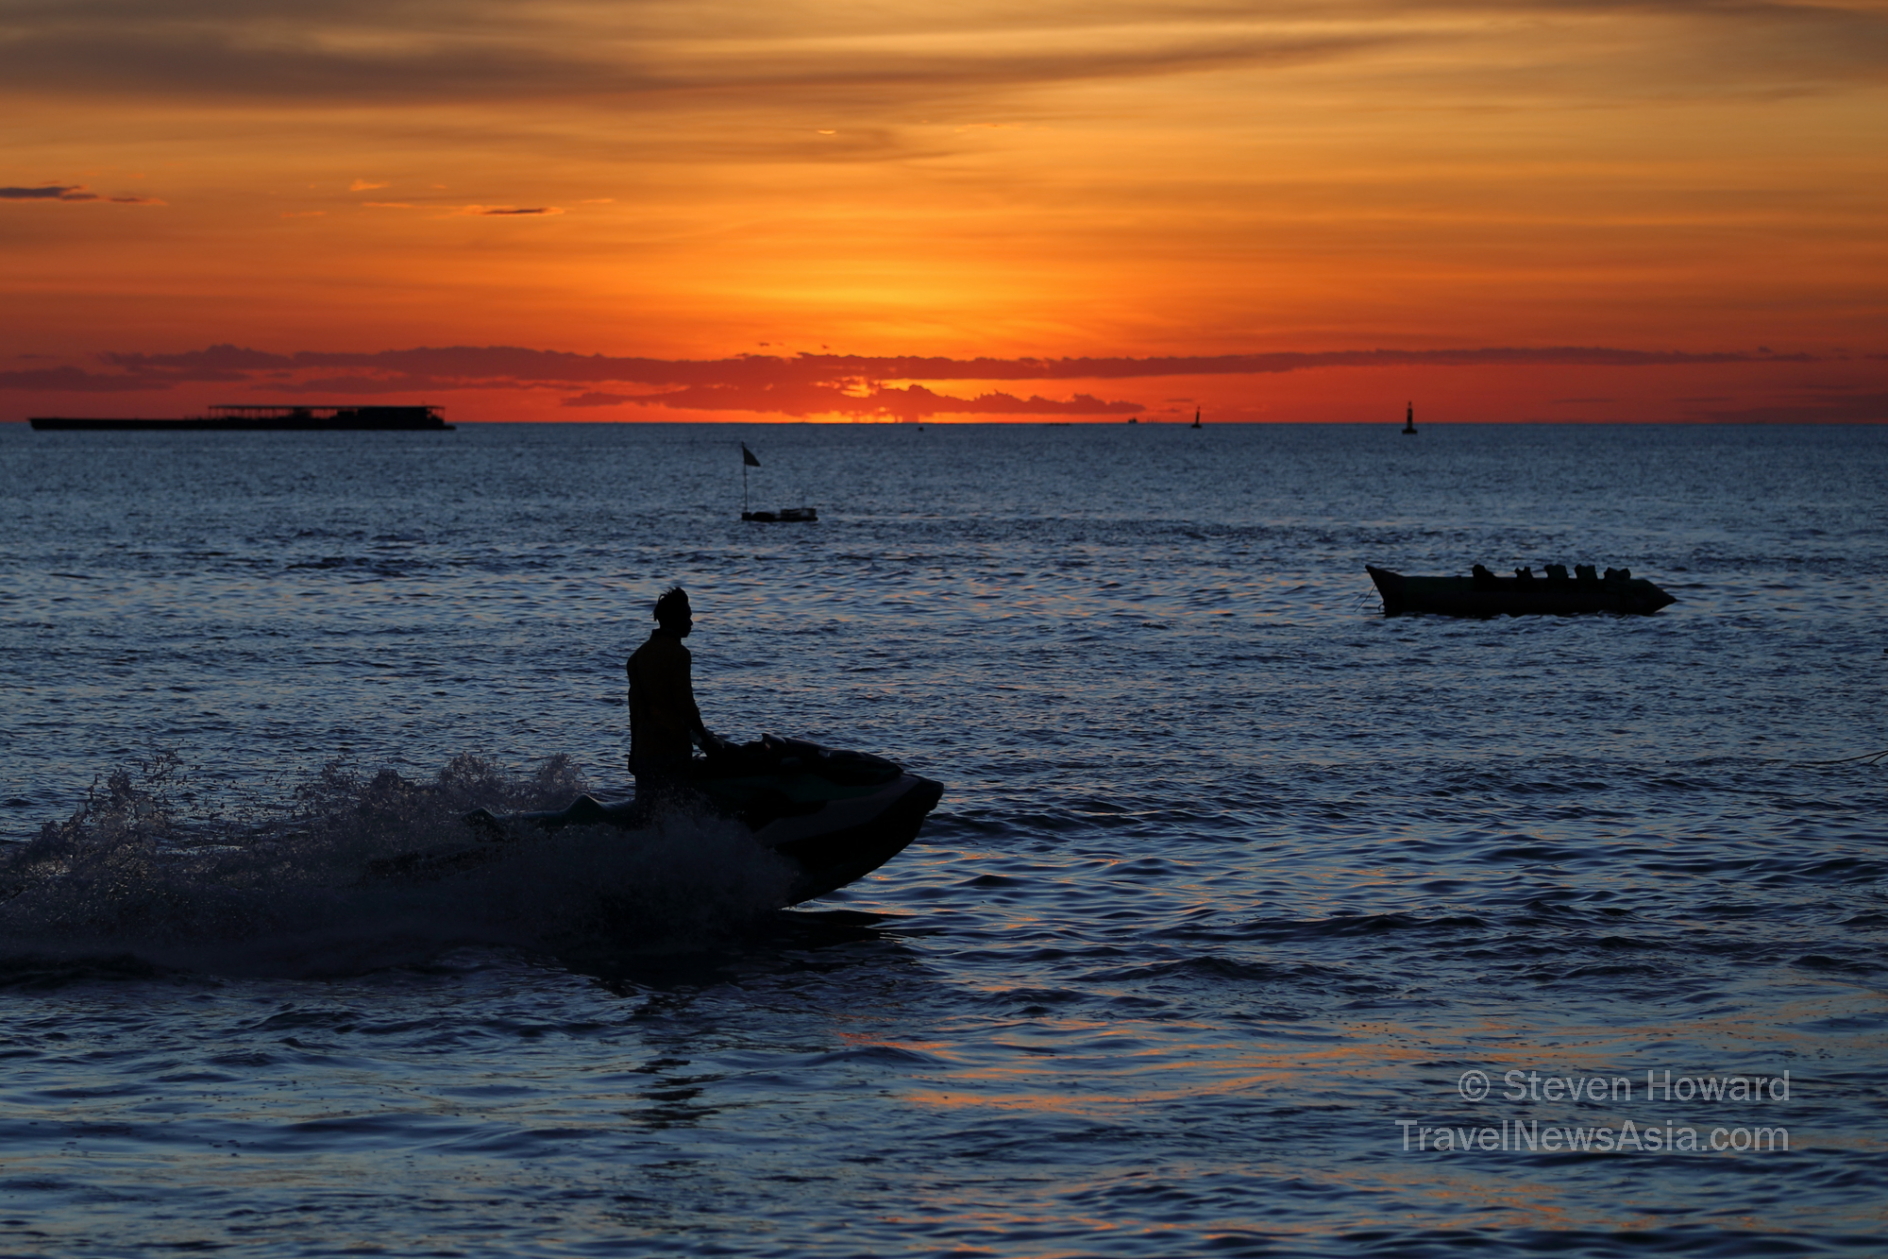 Sunset in Pattaya, Thailand. Picture by Steven Howard of TravelNewsAsia.com Click to enlarge.